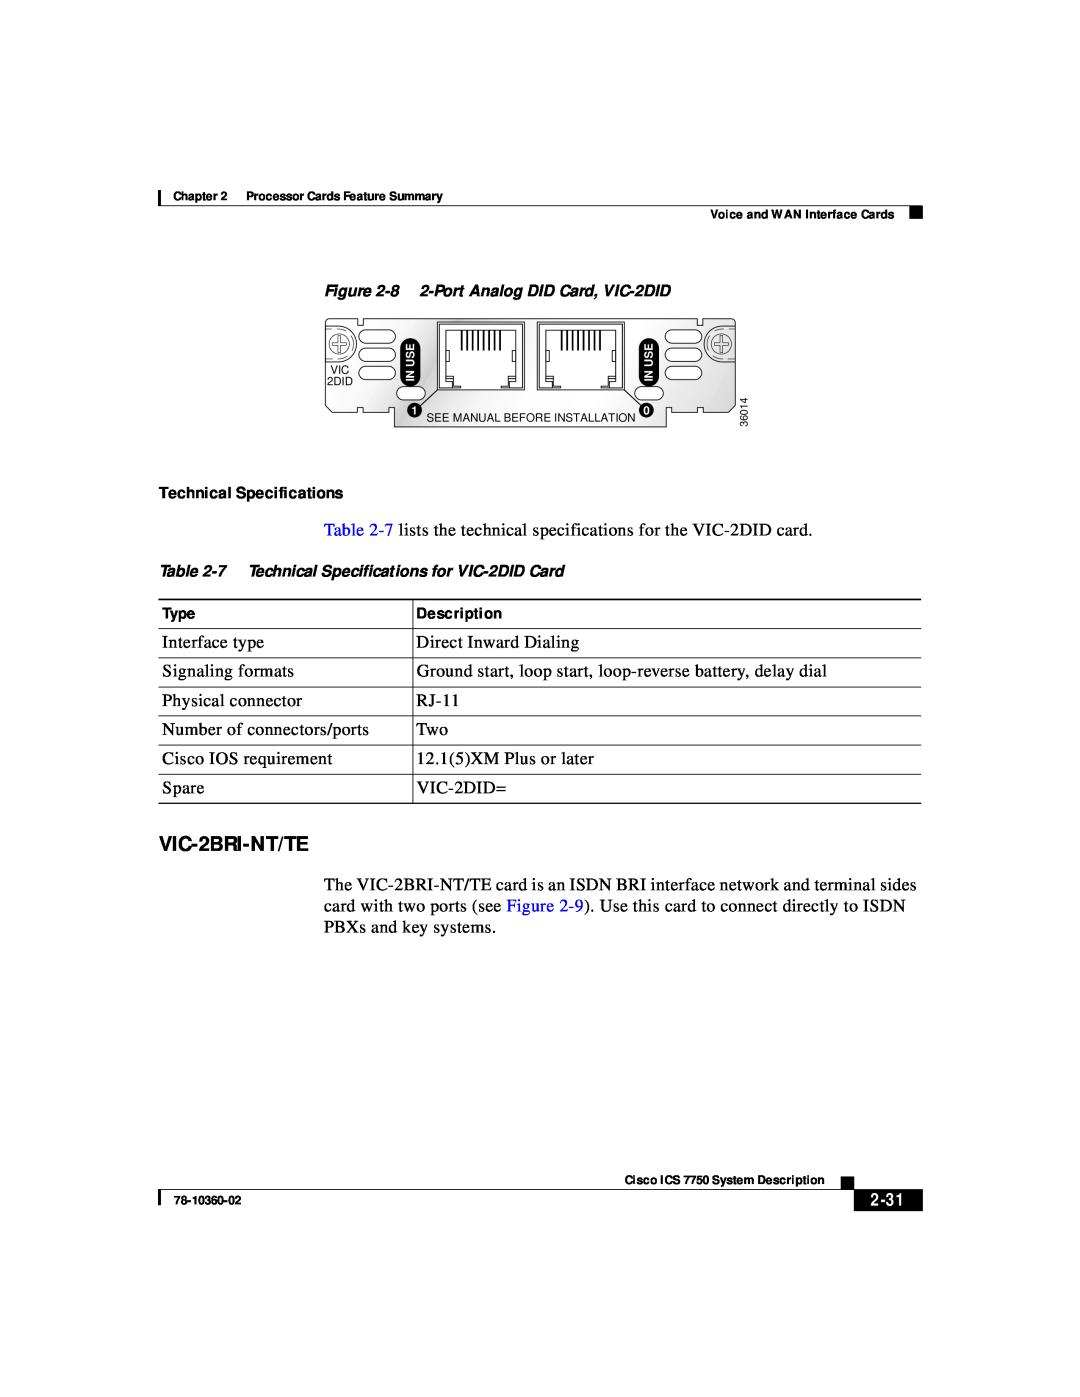 Cisco Systems ICS-7750 manual VIC-2BRI-NT/TE, Technical Specifications, 2-31 